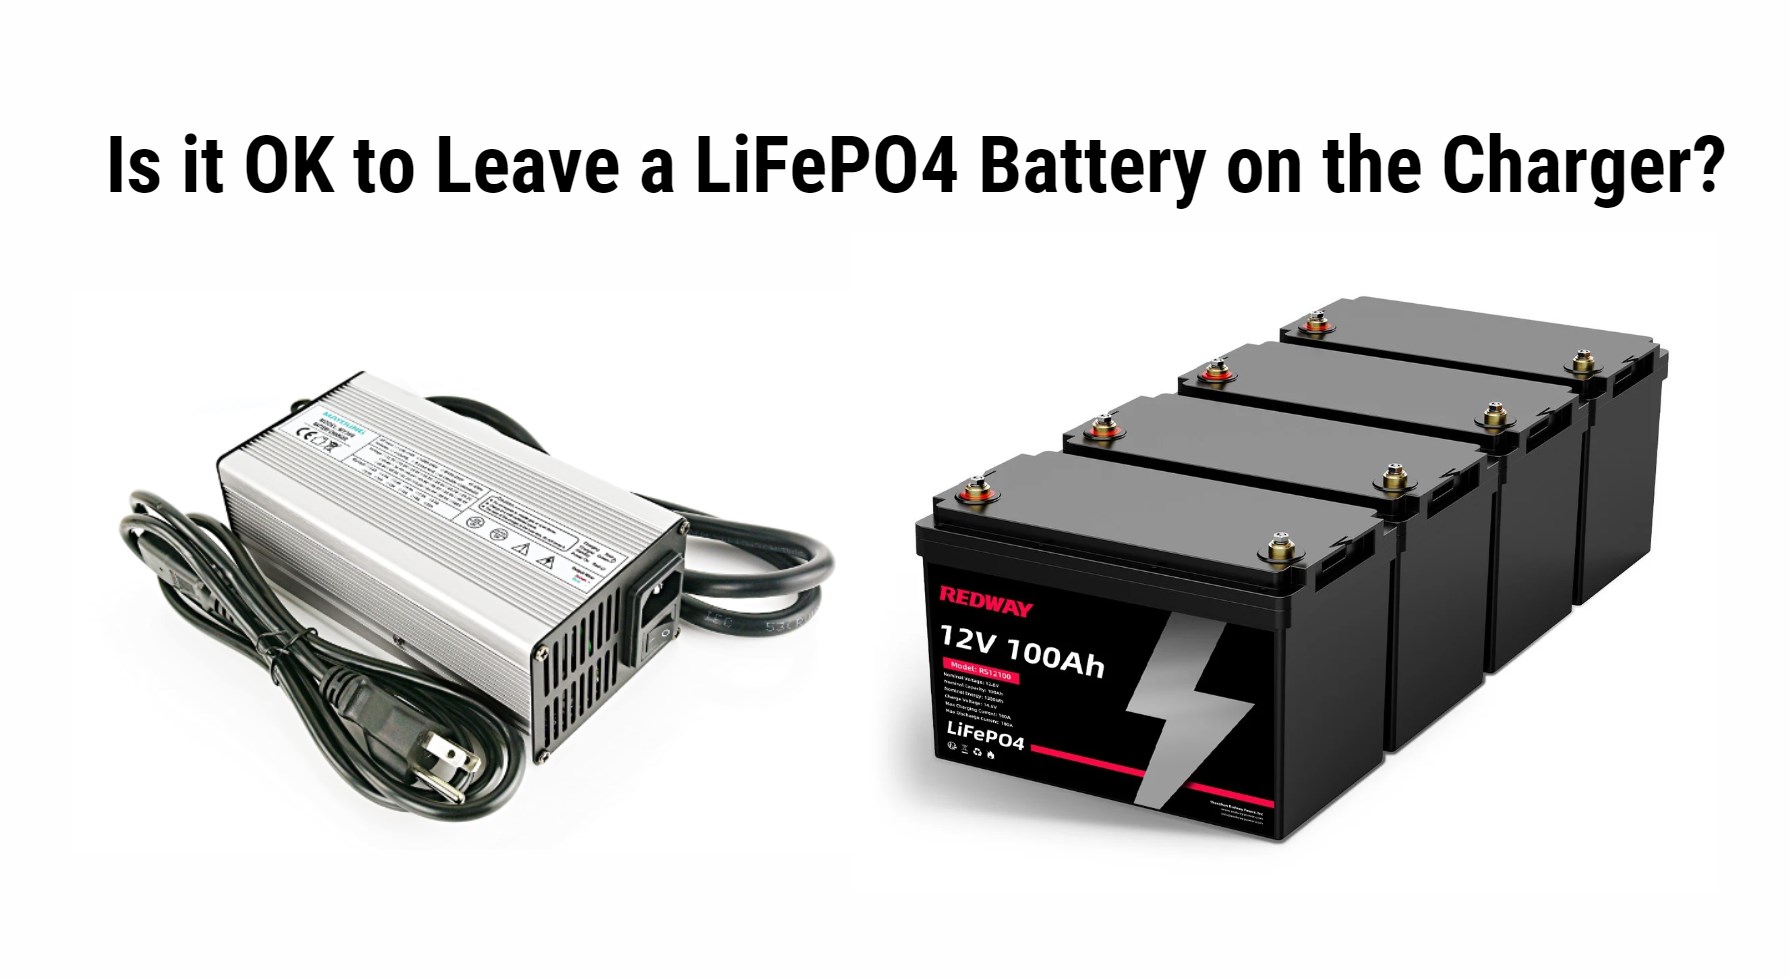 Is it OK to Leave a LiFePO4 Battery on the Charger?